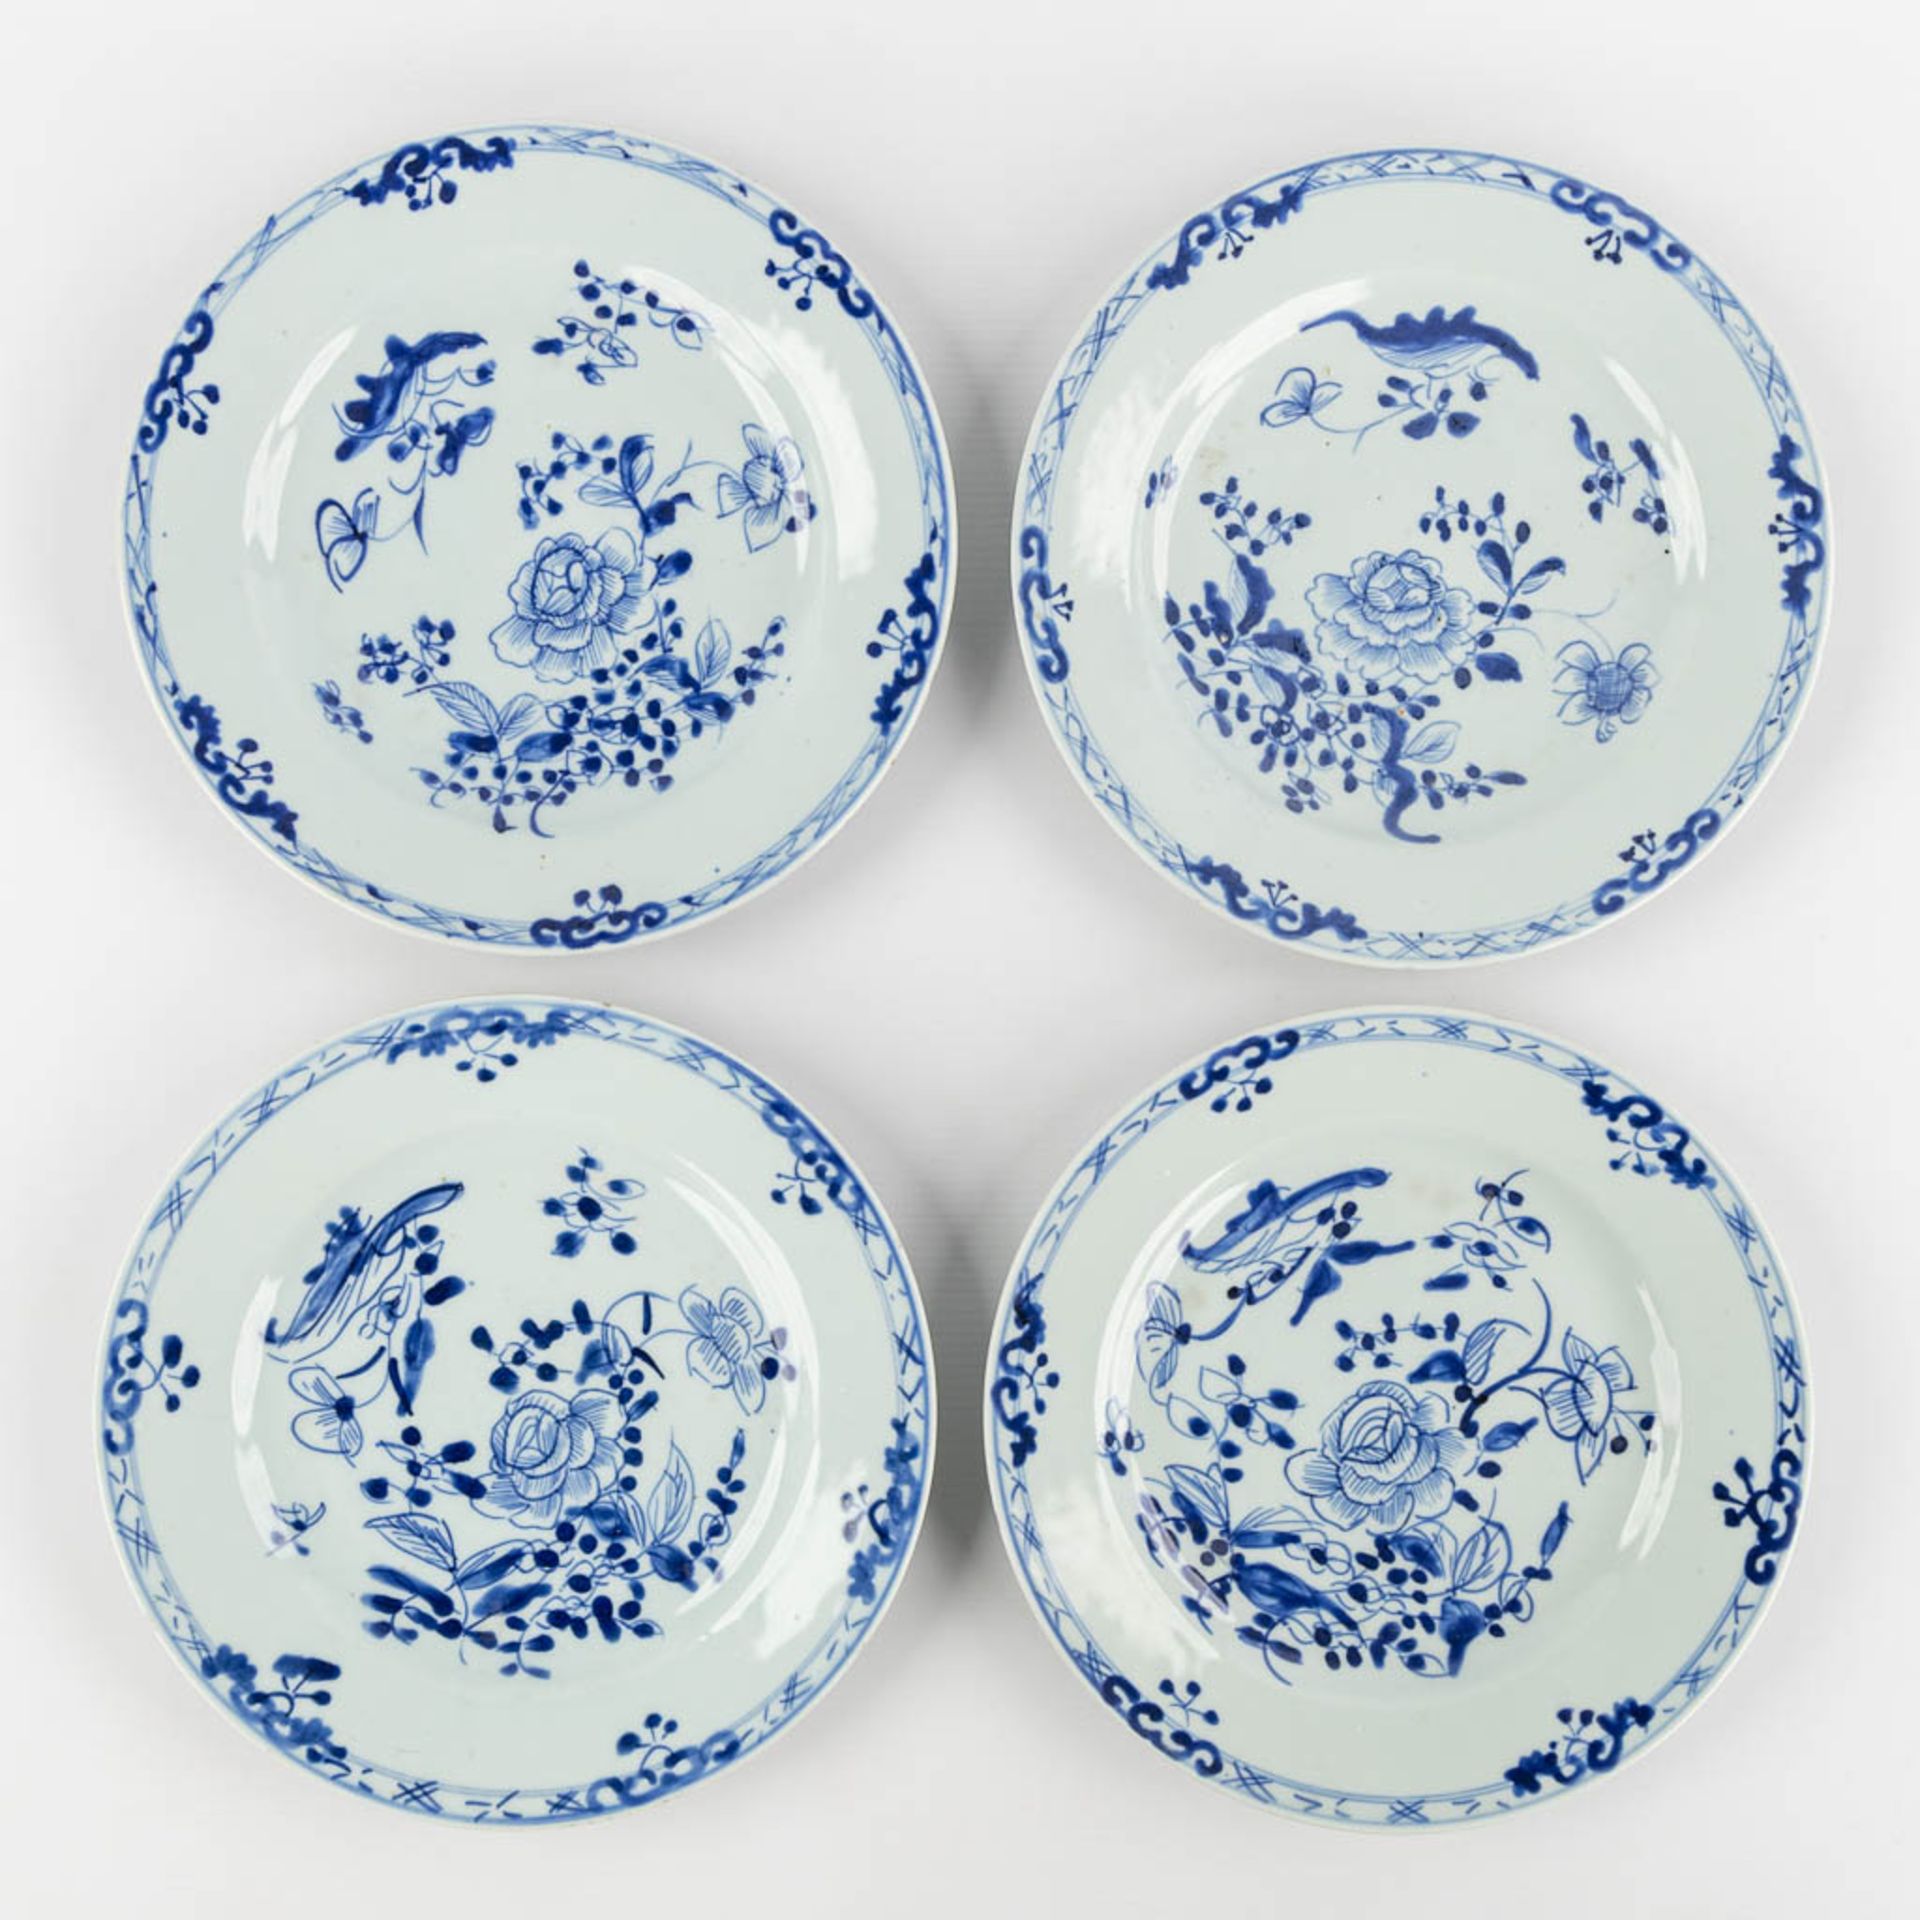 Fifteen Chinese cups, saucers and plates, blue white and Famille Roze. (D:23,4 cm) - Image 3 of 15